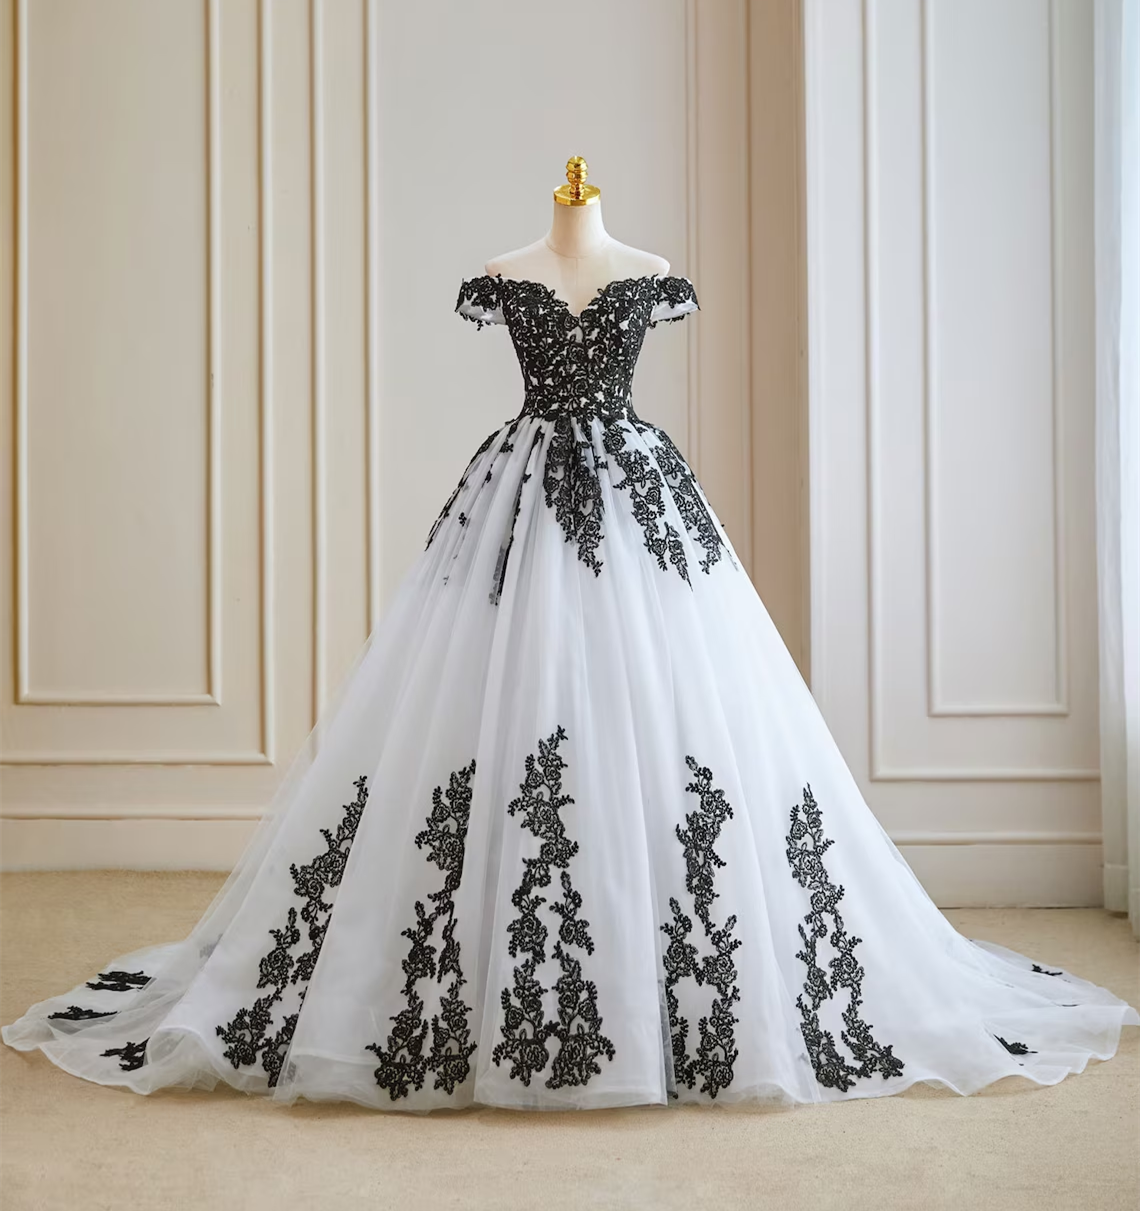 Black And White Non-traditional Gothic Wedding Dress